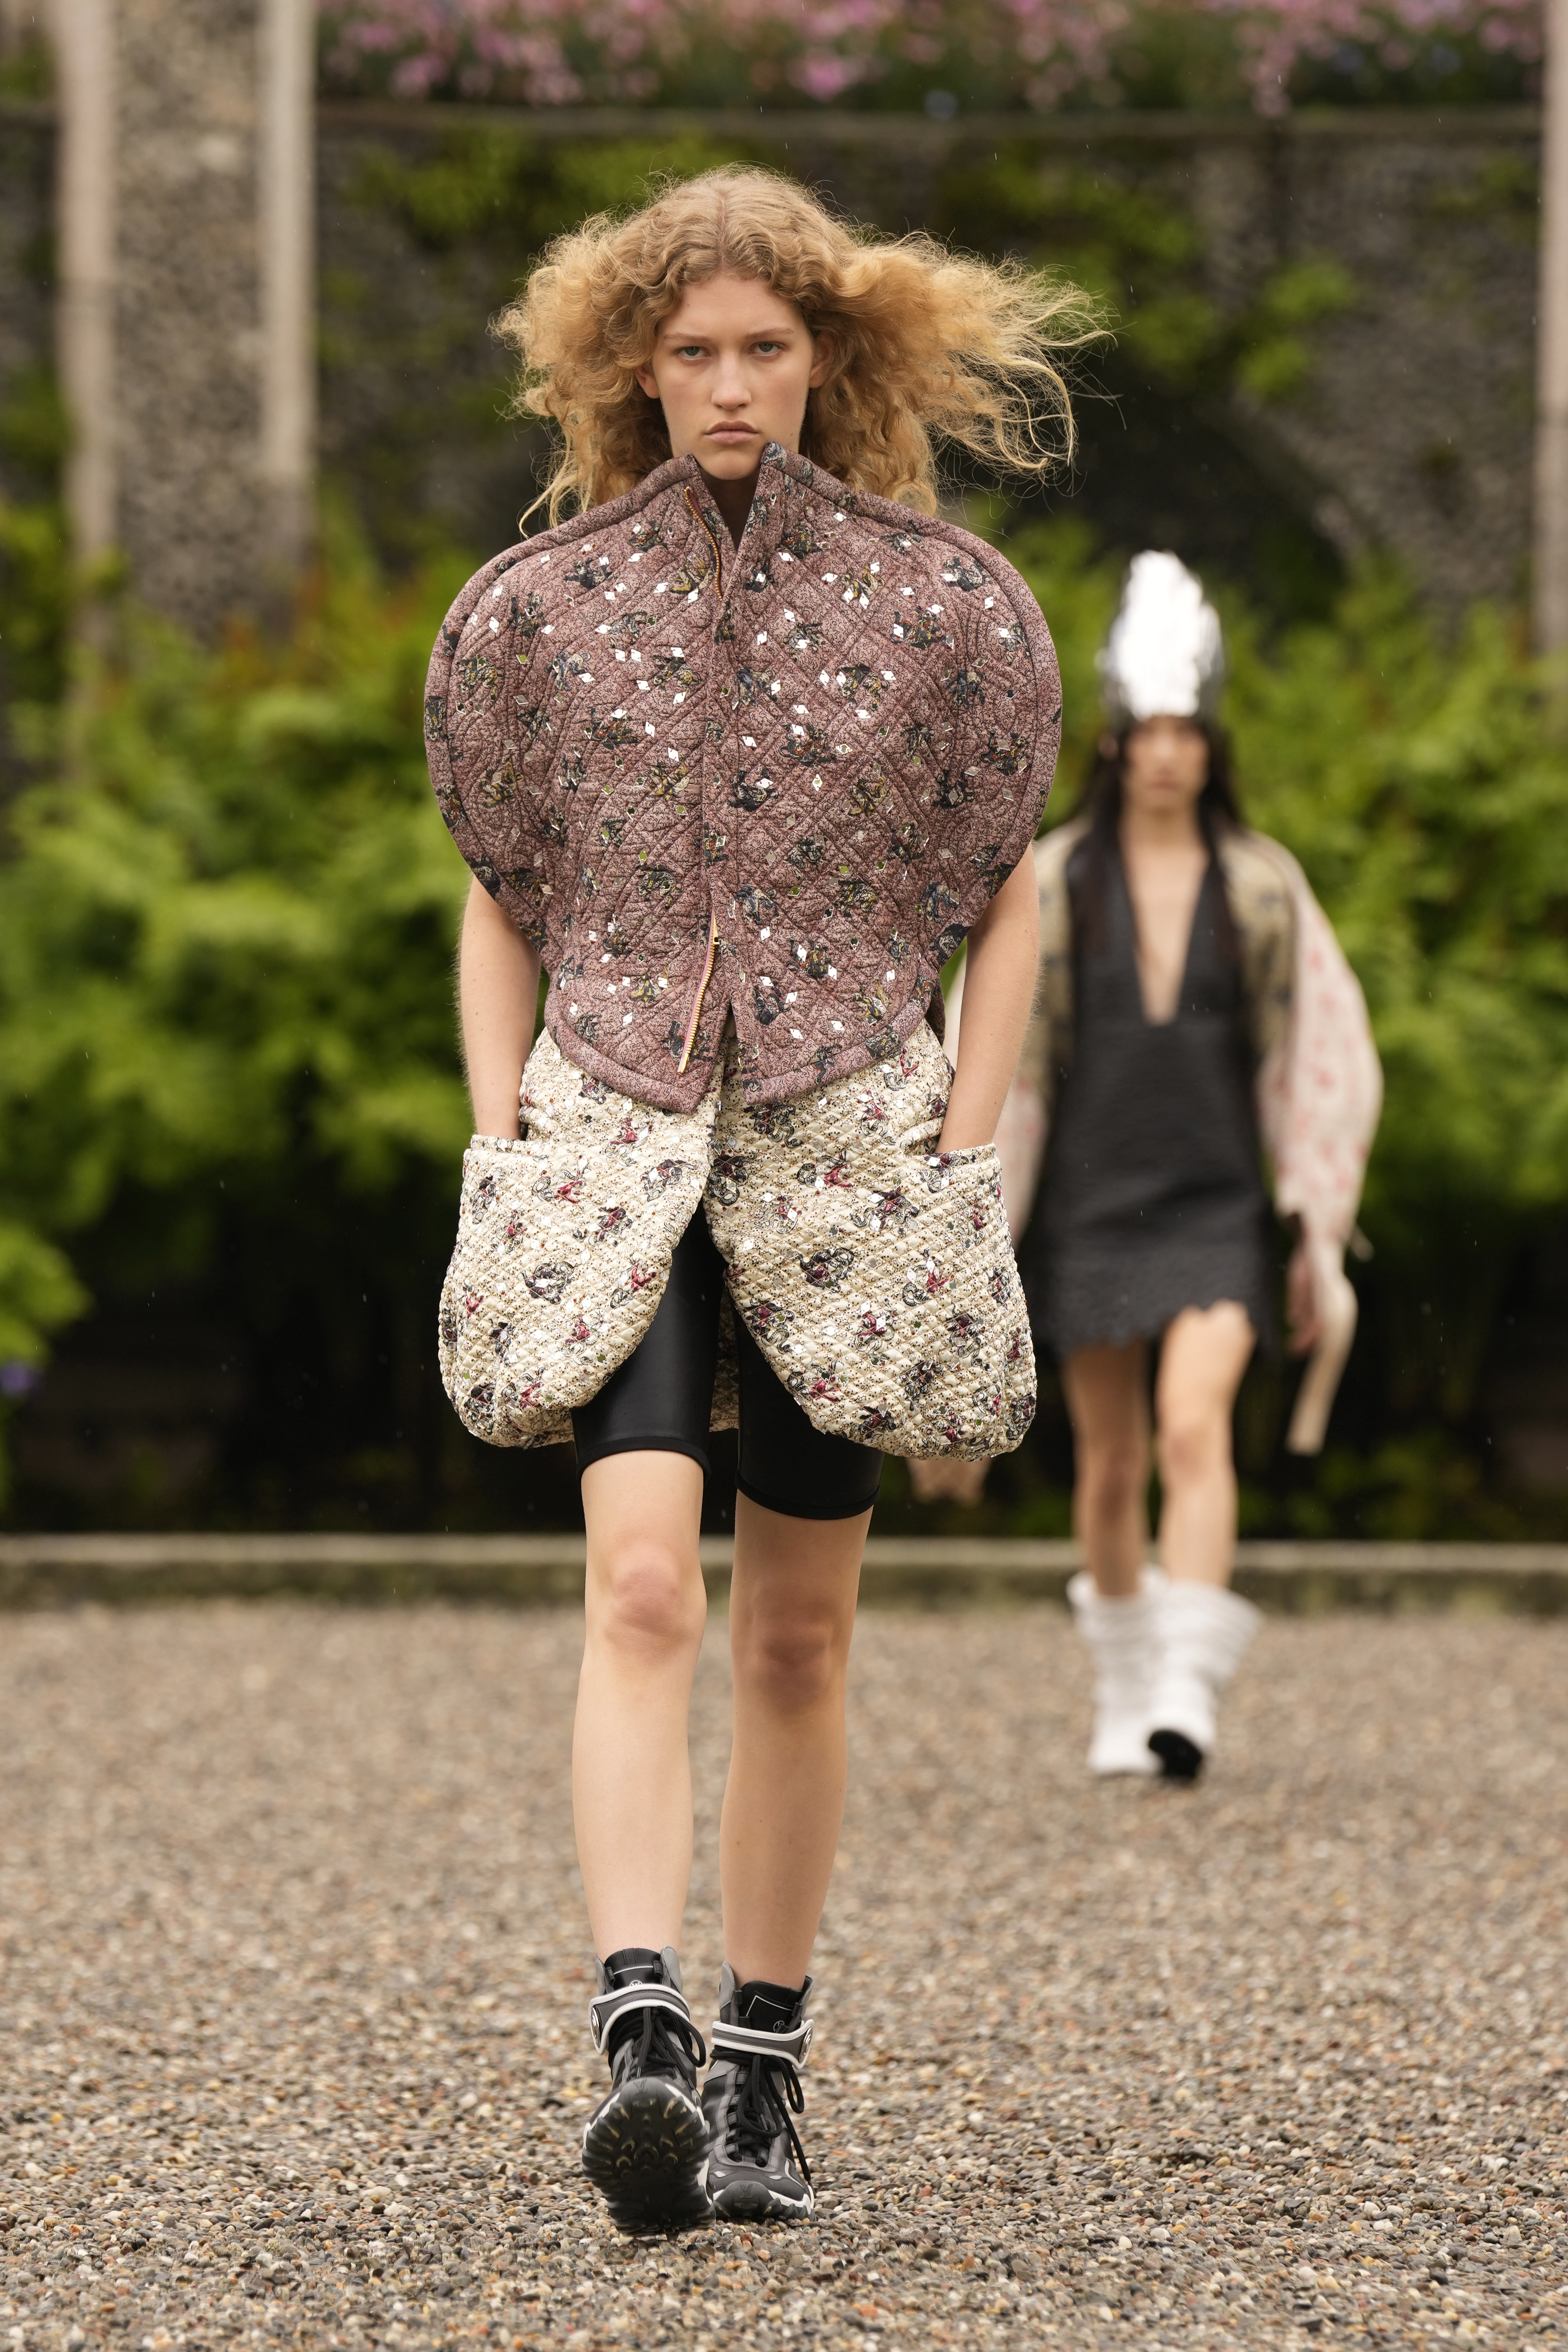 Louis Vuitton takes Baroque and botanical cues from Italy's Isola